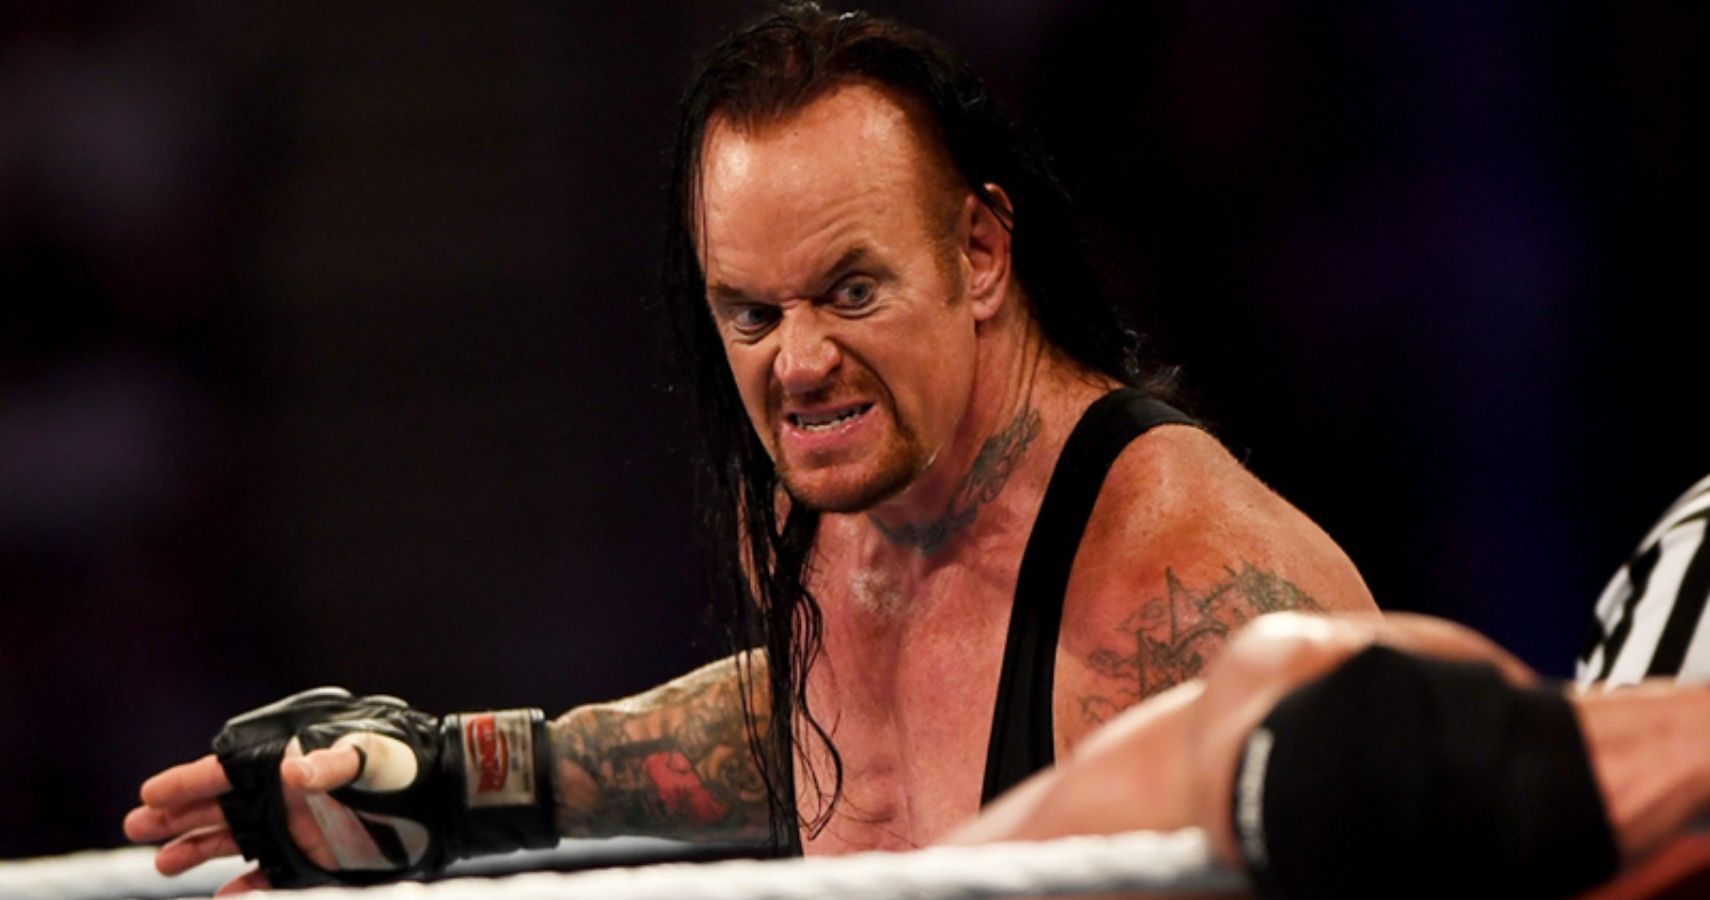 The Undertaker was inducted into the Hall of Fame on April 1, 2022